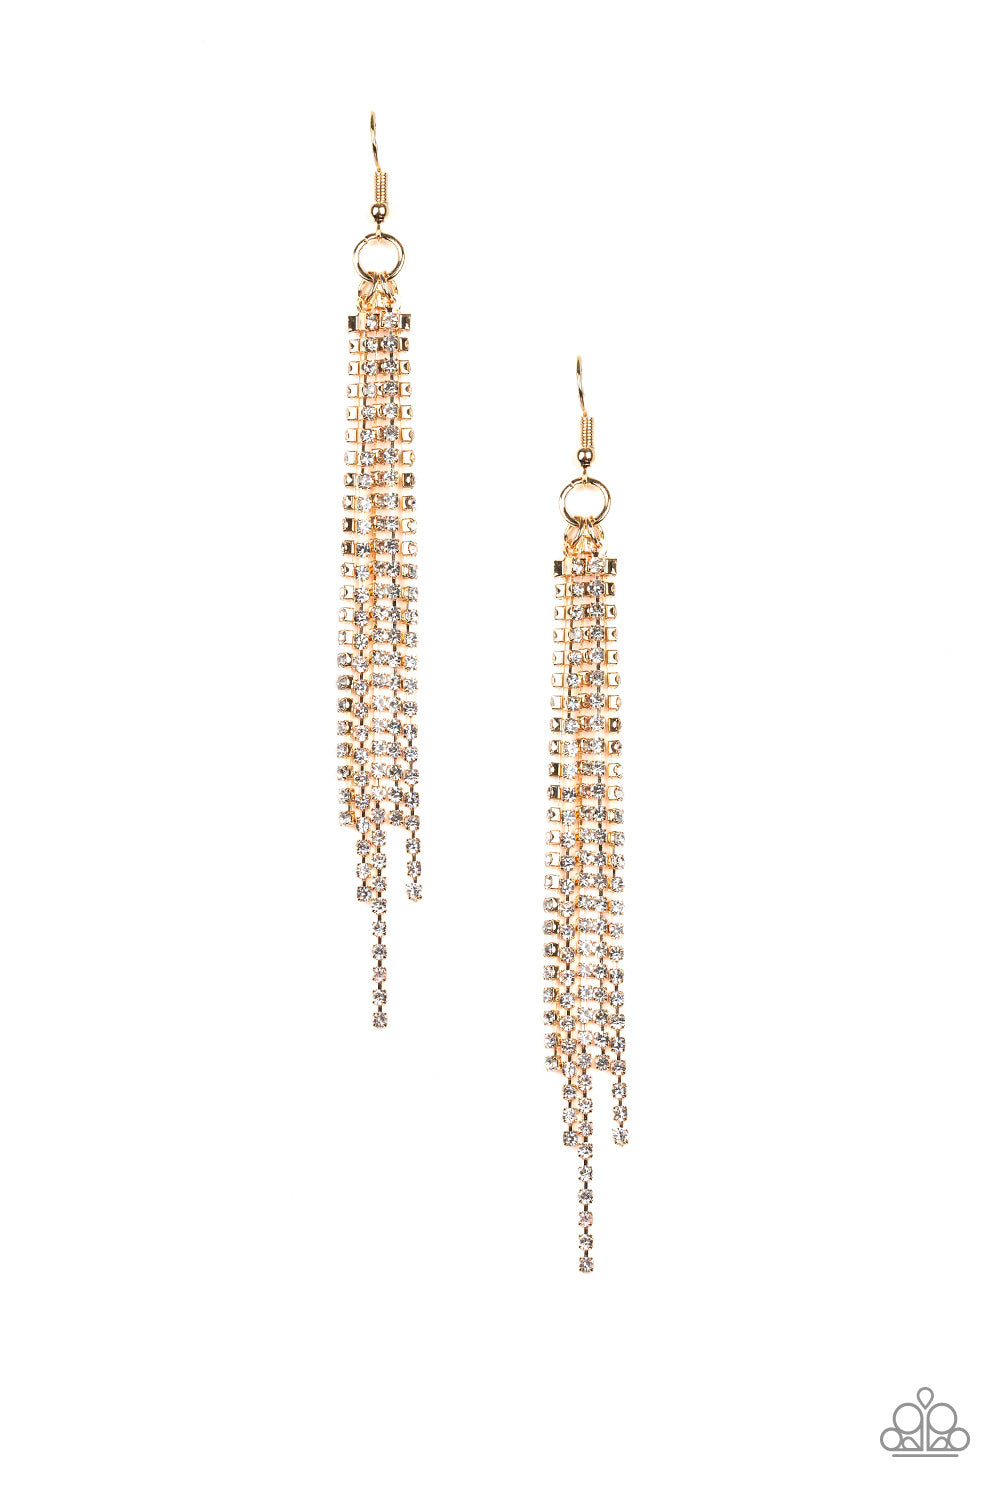 Paparazzi Center Stage Status Gold Fishhook Earrings